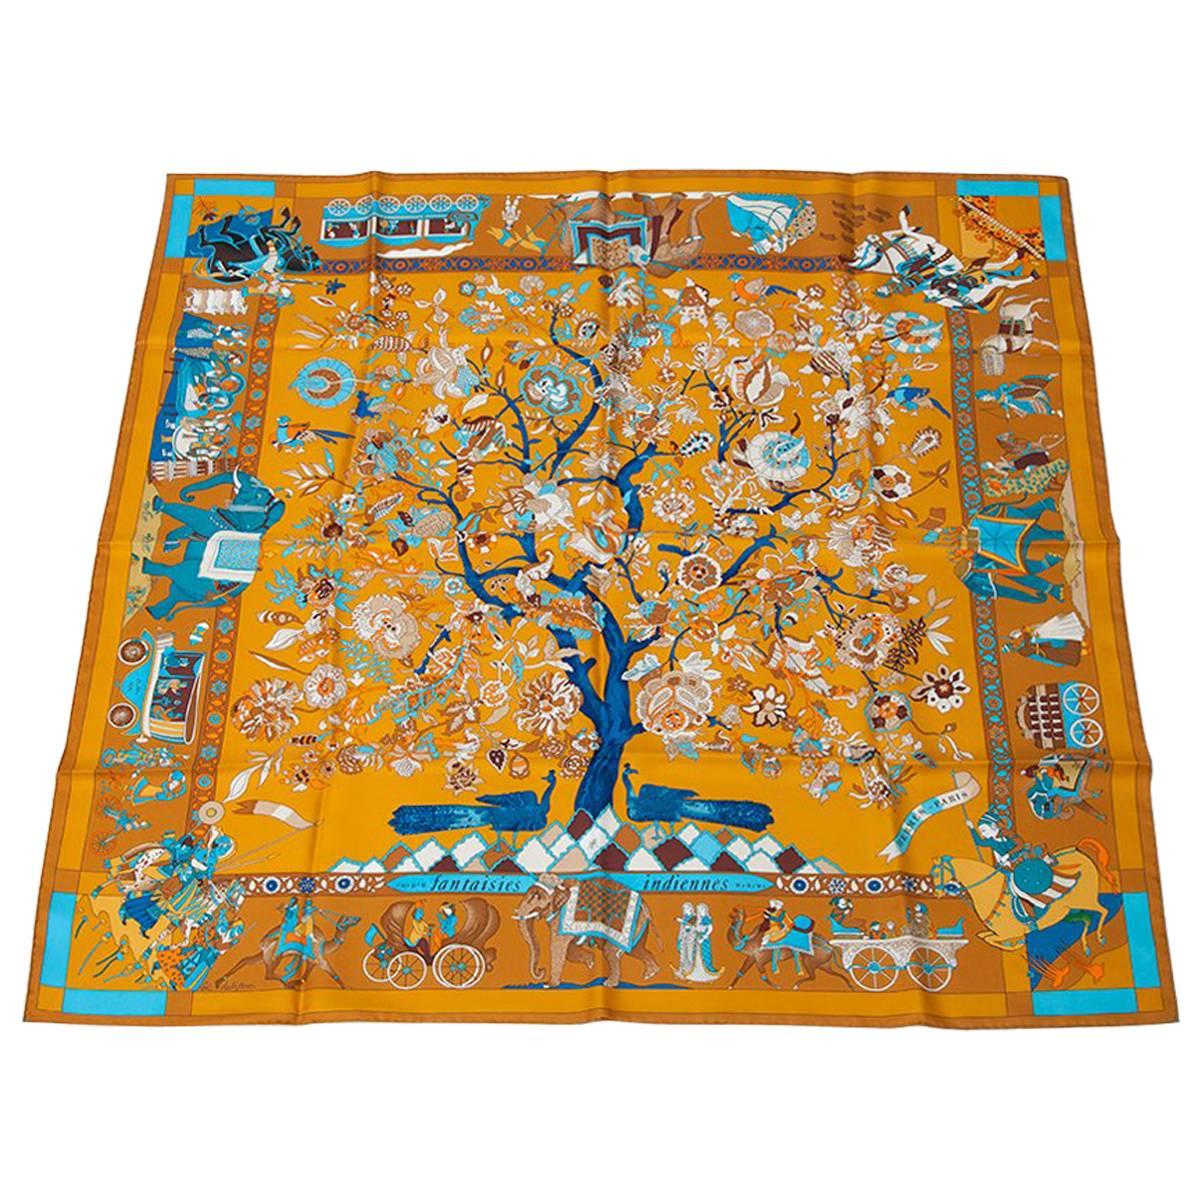 Hermes “Fantaisies Indiennes” Silk Twill Carre Scarf 